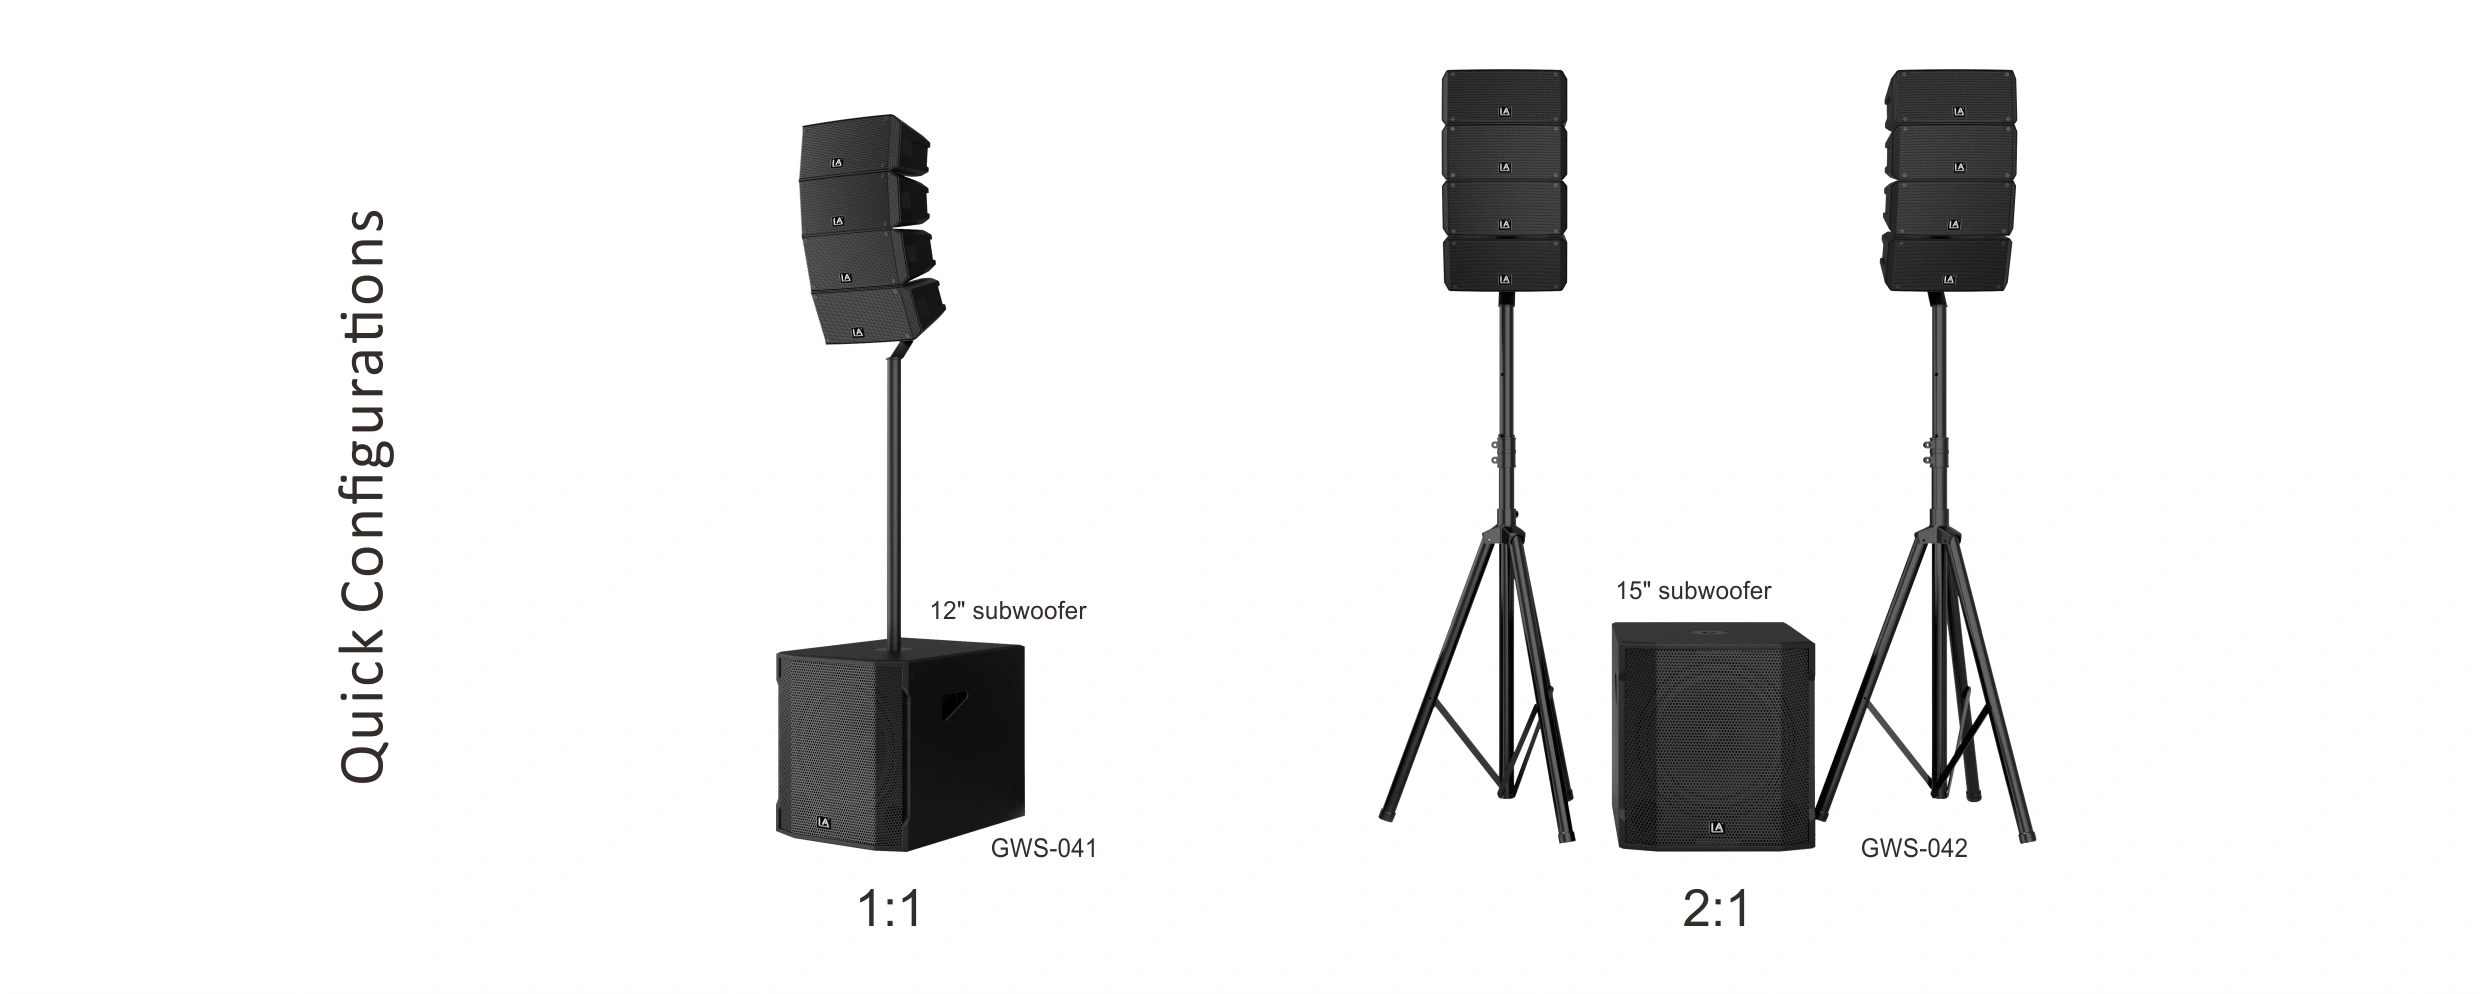 compact line array systems,compact line array system,array compact,ultra compact,array line